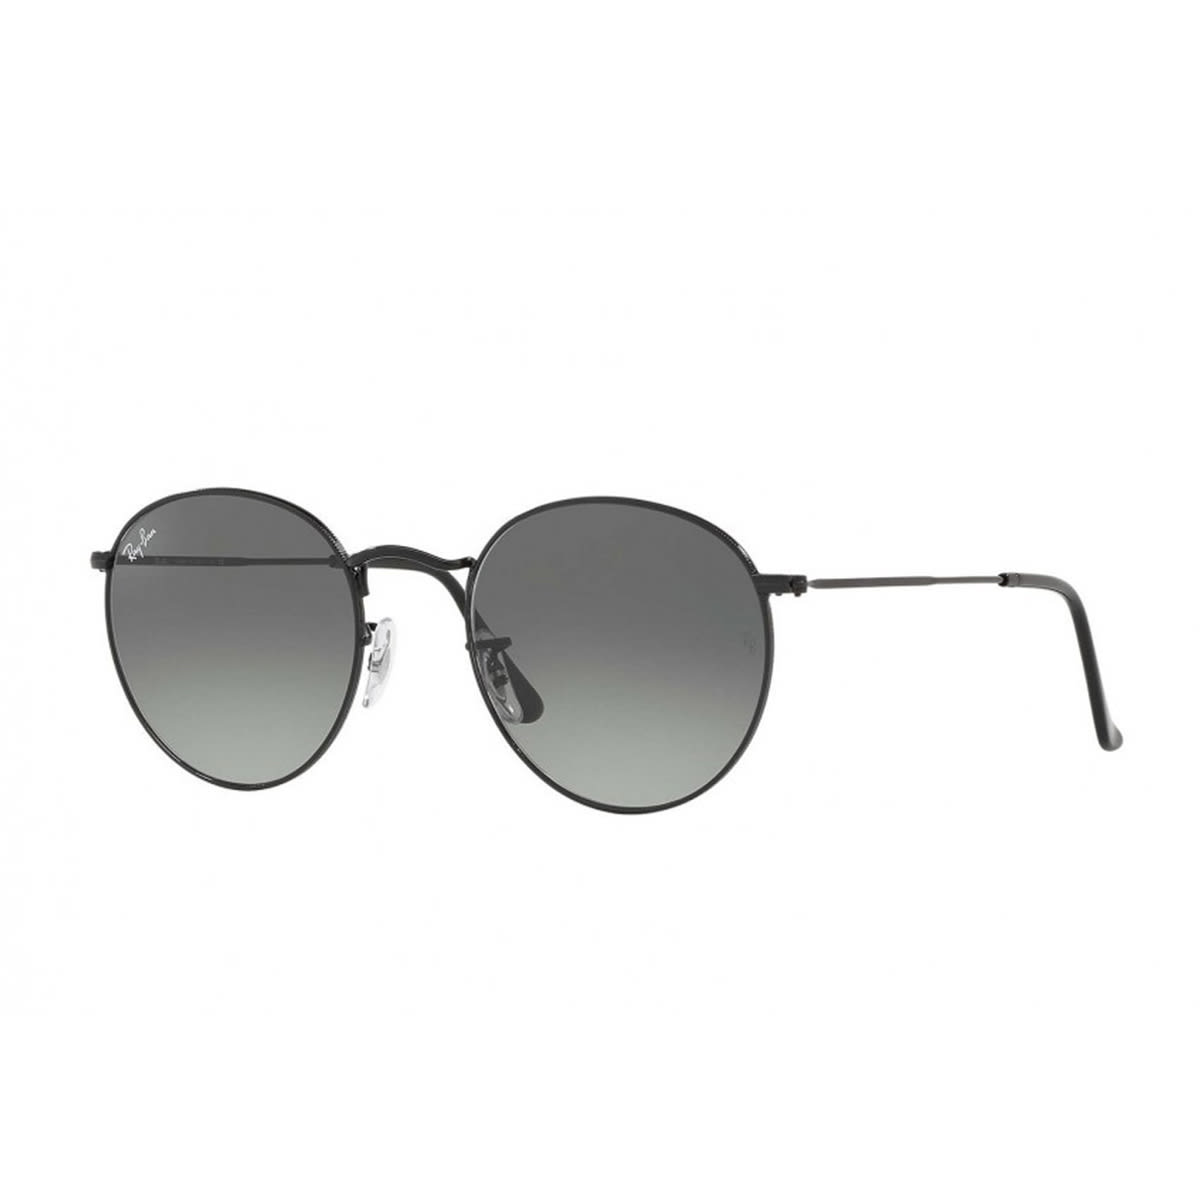 Ray Ban Rb3447n 002/71 Sunglasses In Nero